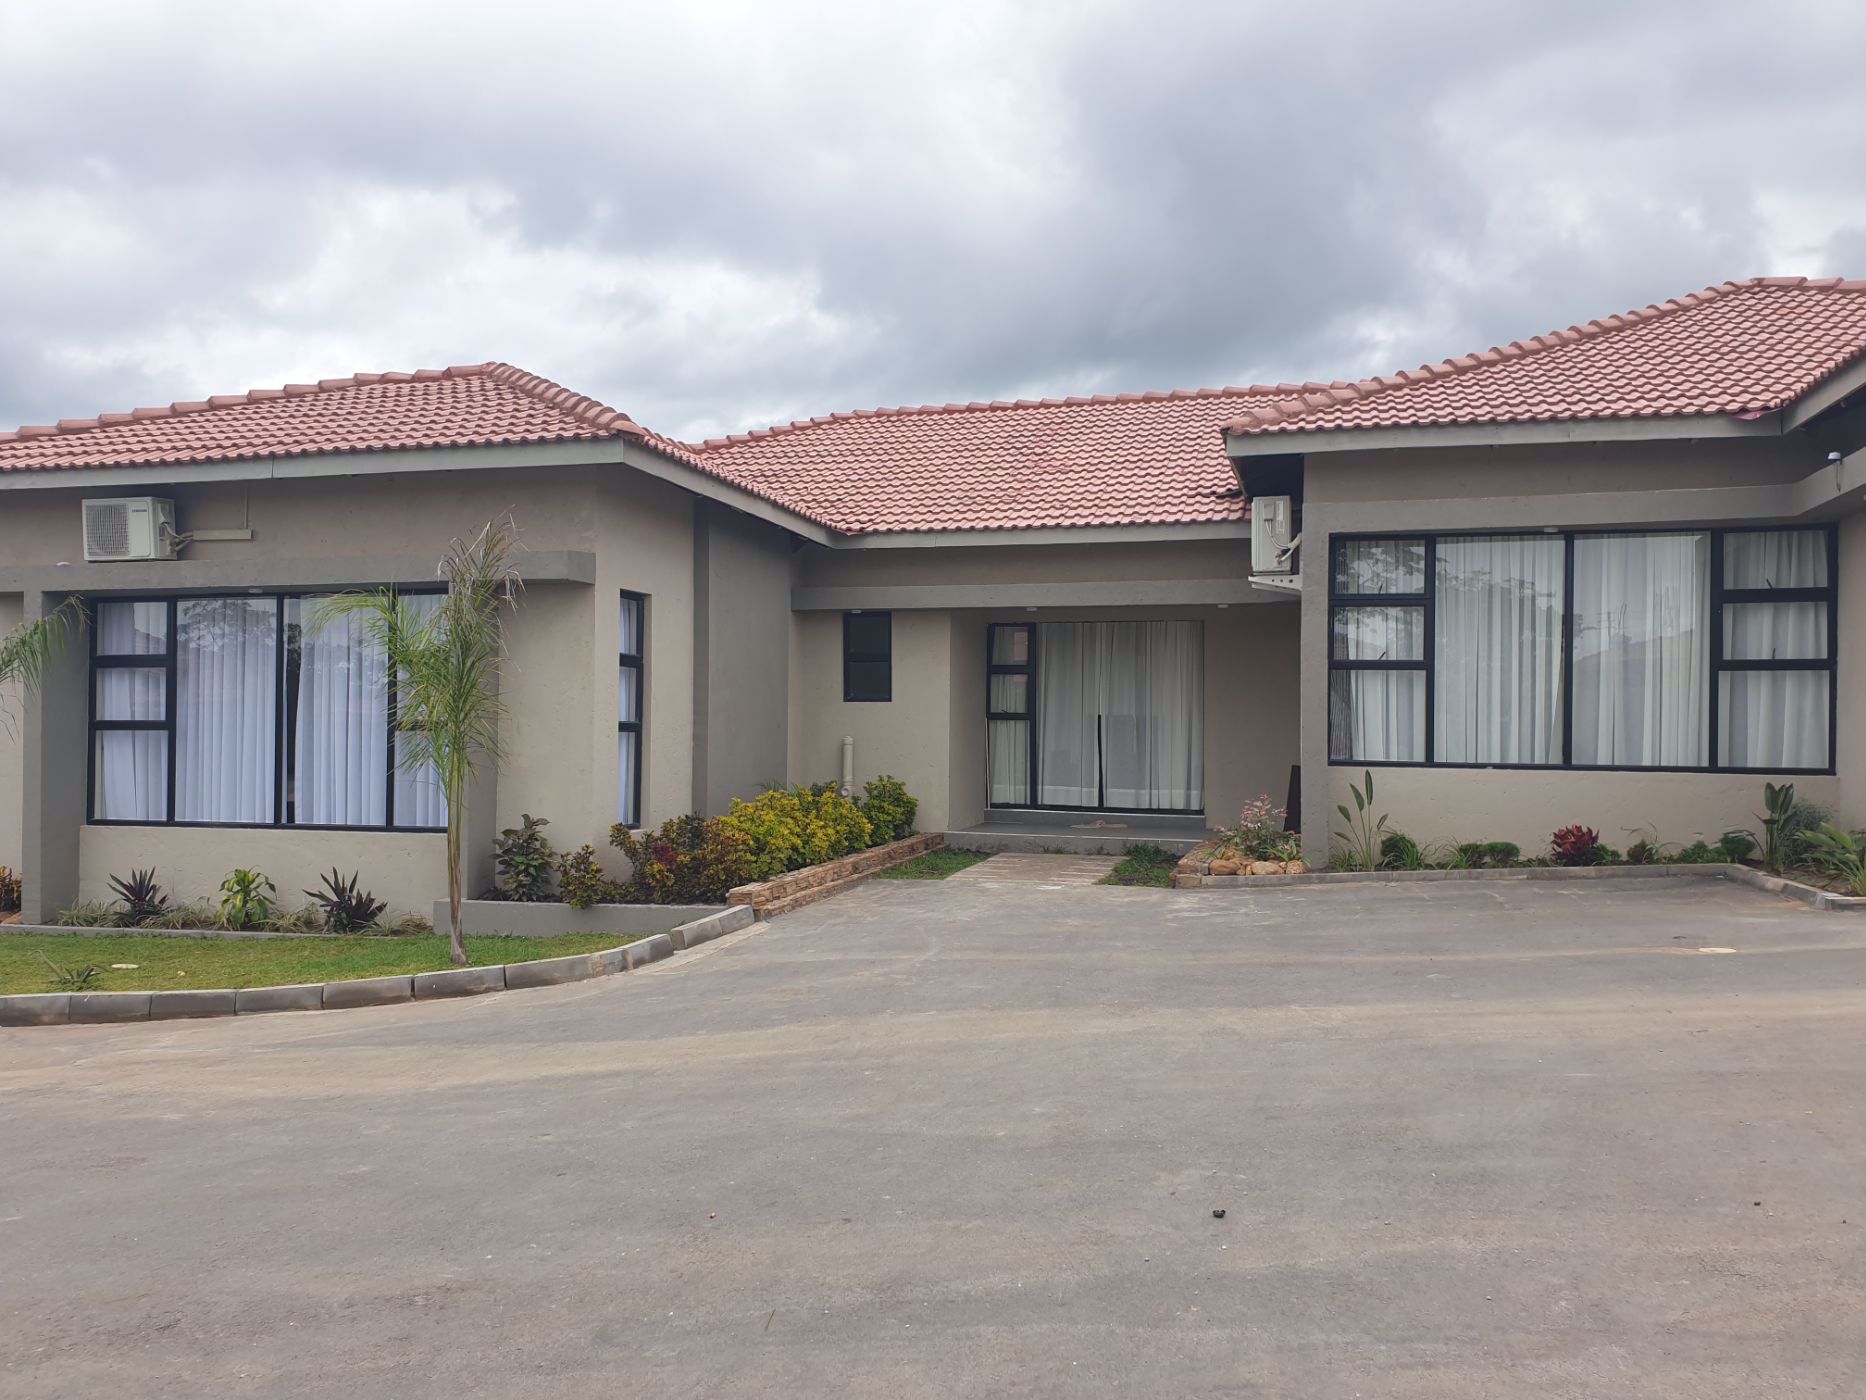 4 bedroom house to rent in Roma (Zambia)